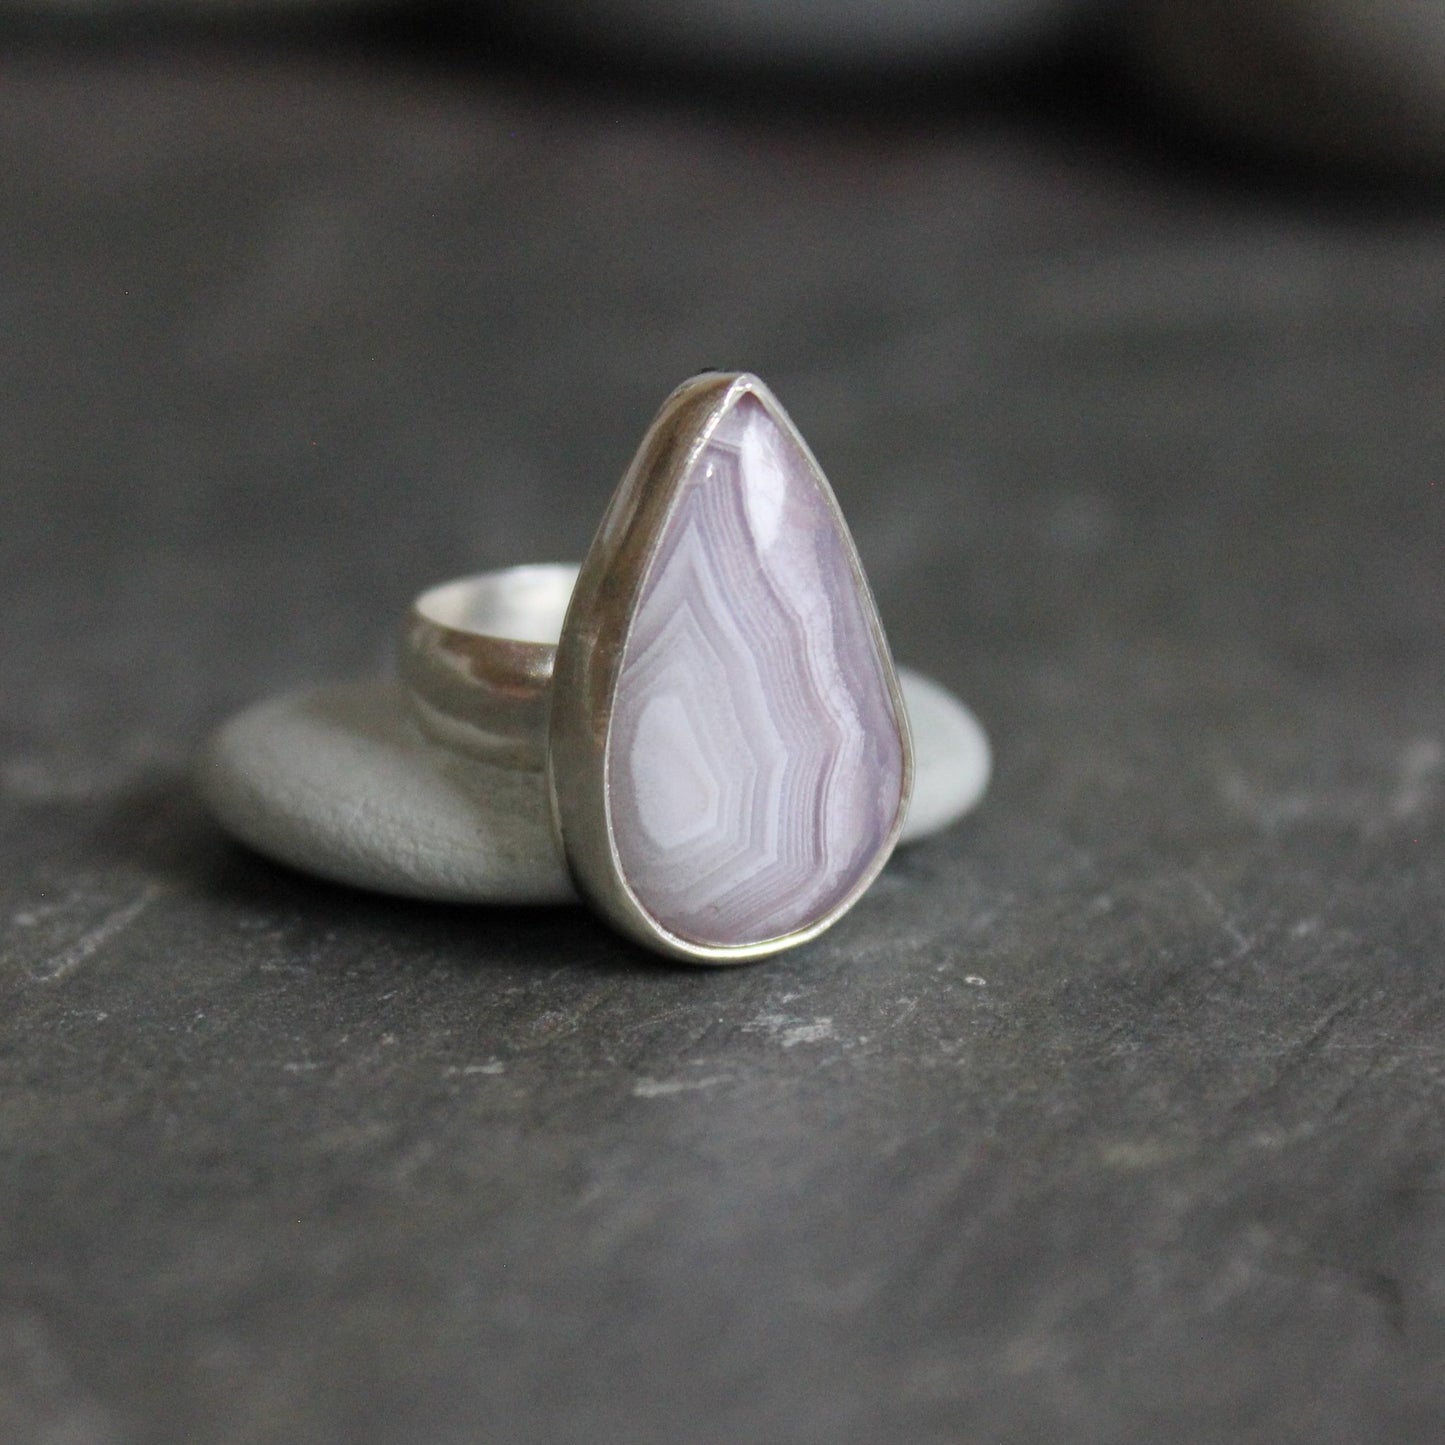 This is a teardrop agua nueva agate from Mexico that has banding and is set in a fine and sterling silver bezel setting on a sturdy silver band.  Size 4 1/4